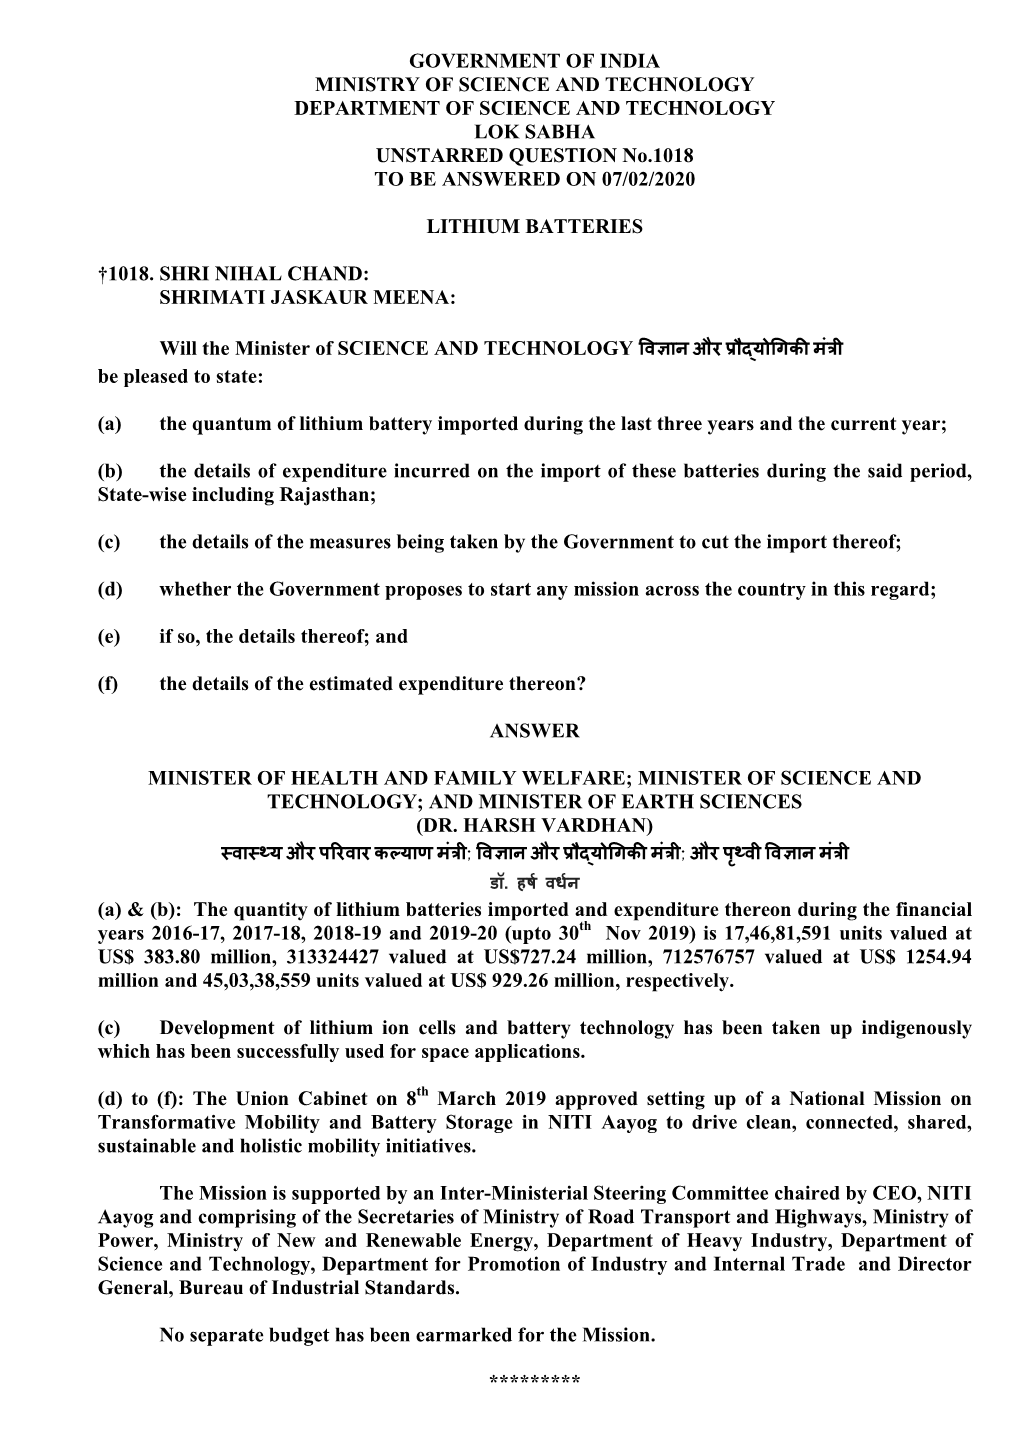 GOVERNMENT of INDIA MINISTRY of SCIENCE and TECHNOLOGY DEPARTMENT of SCIENCE and TECHNOLOGY LOK SABHA UNSTARRED QUESTION No.1018 to BE ANSWERED on 07/02/2020